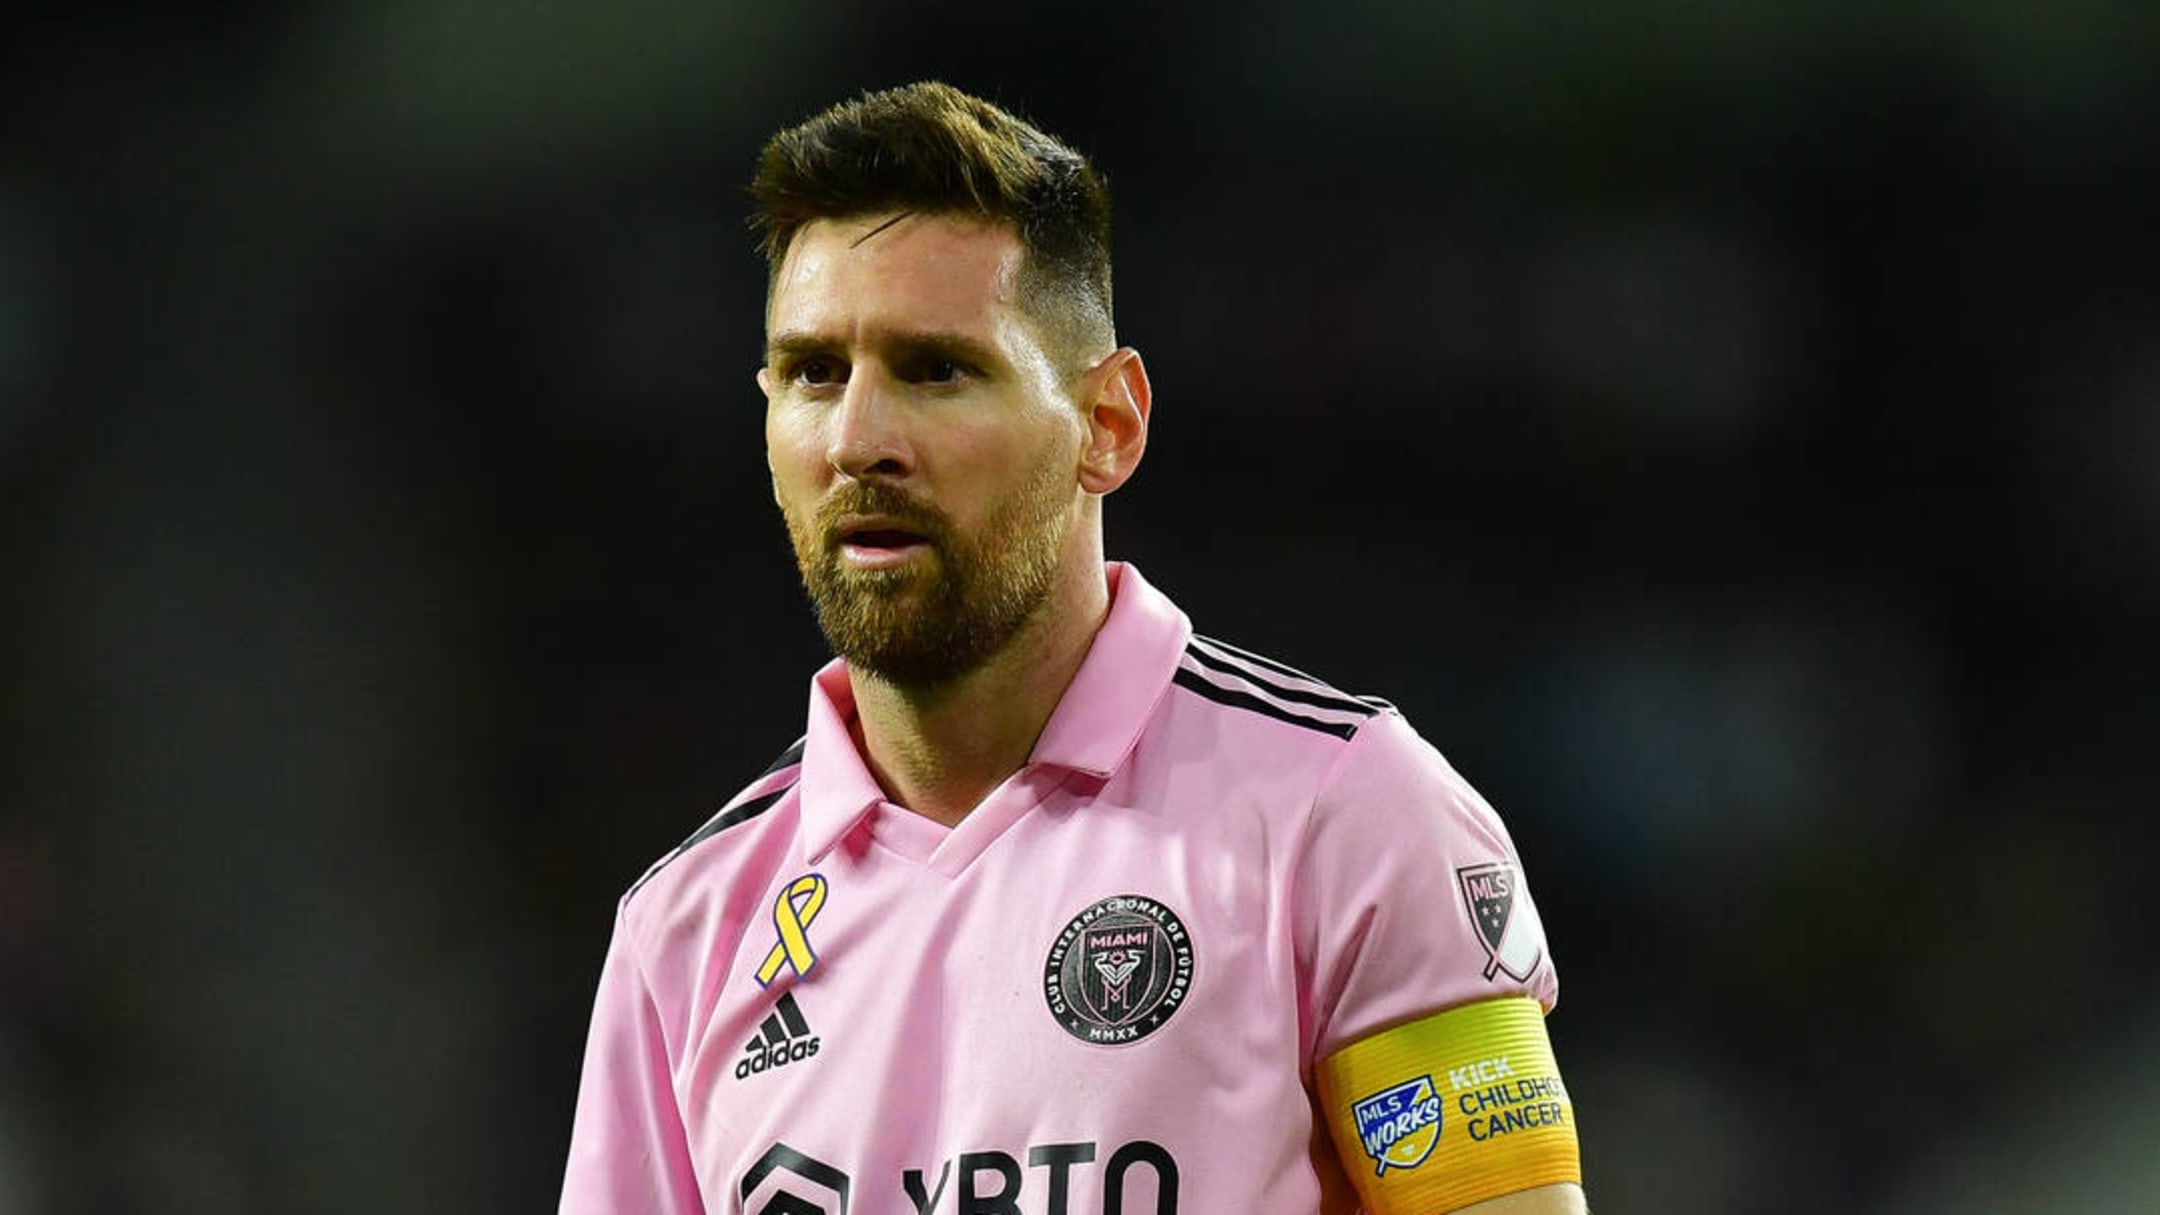 Lionel Messi odds to score a goal for Inter Miami, Argentina: Next match in  MLS vs Toronto FC